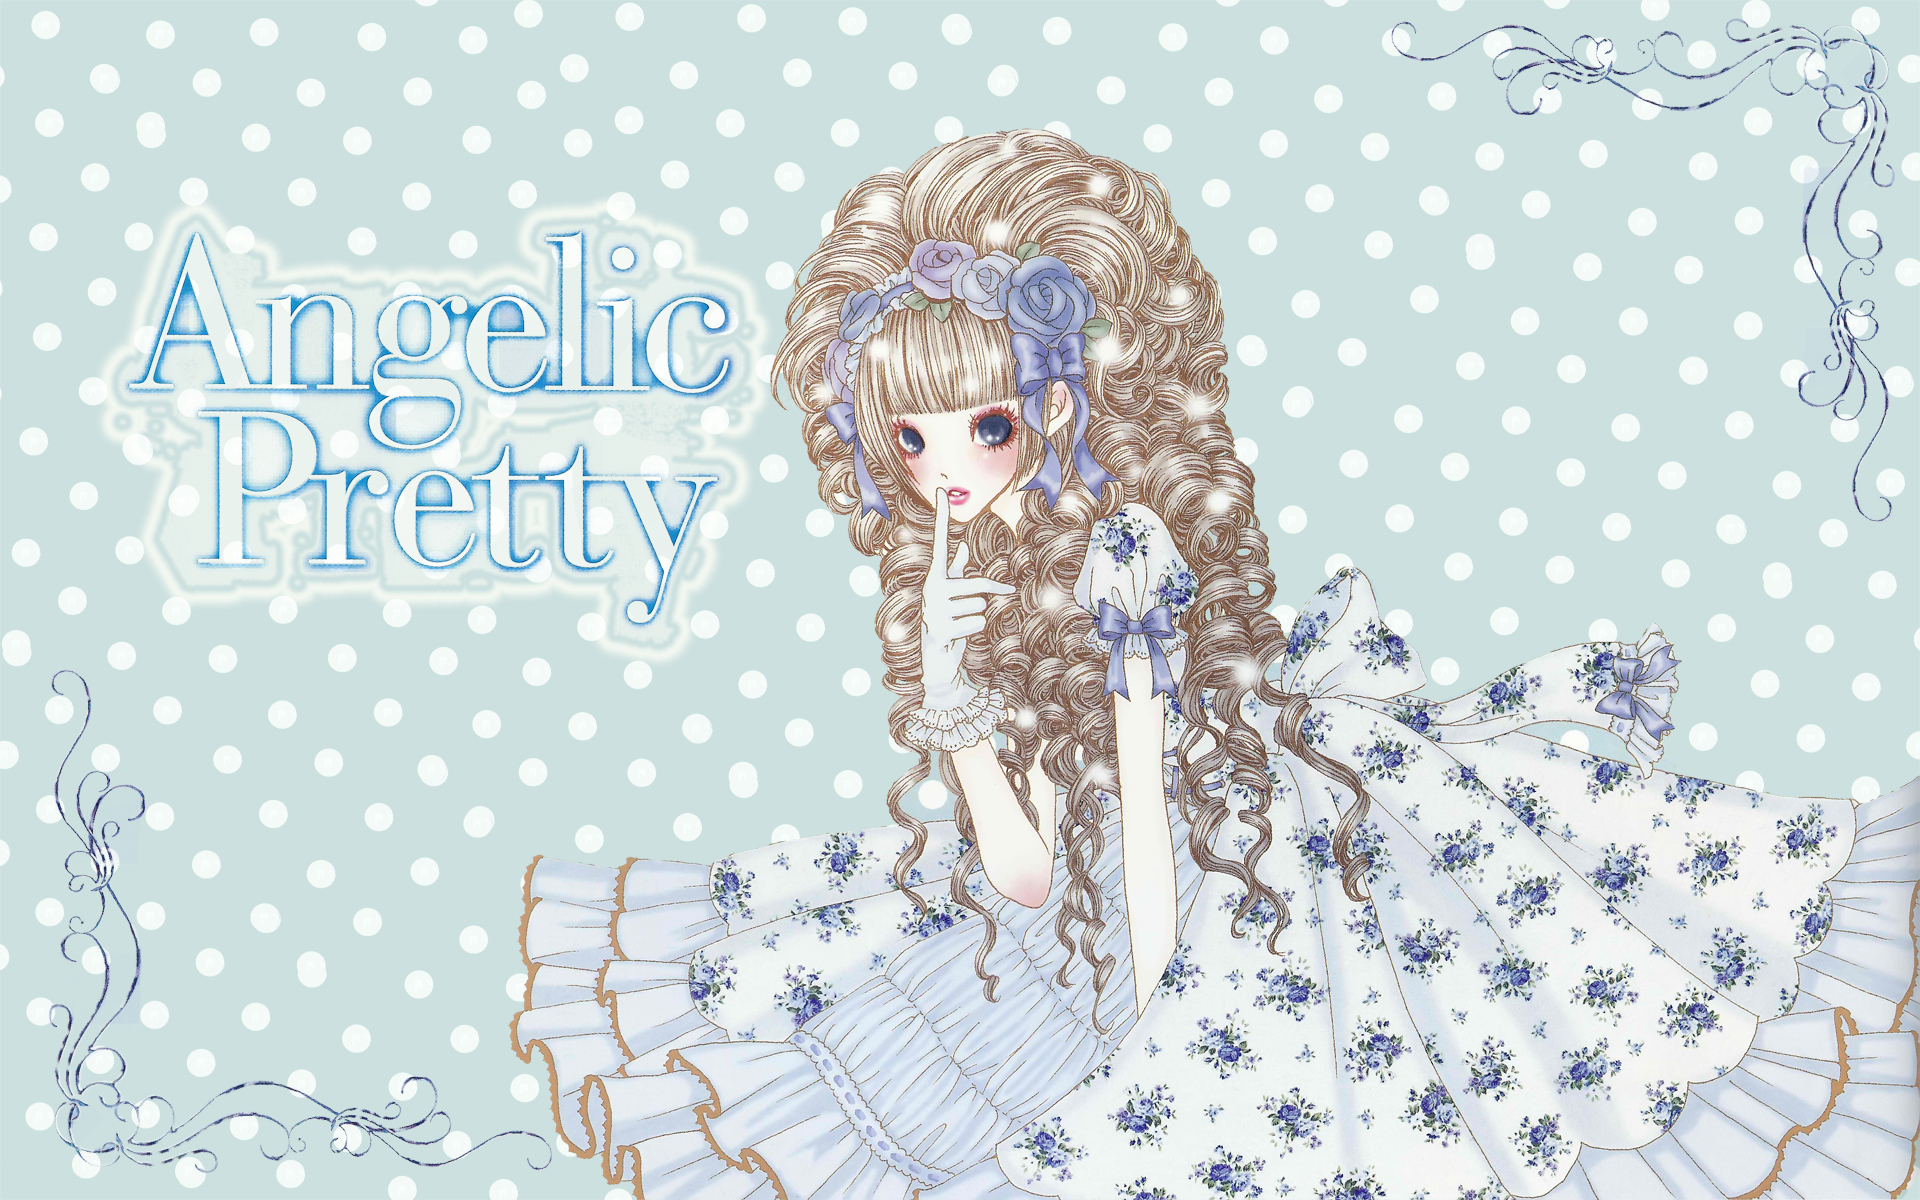 Angelic pretty wallpaper 39 by guillaumes2 on DeviantArt